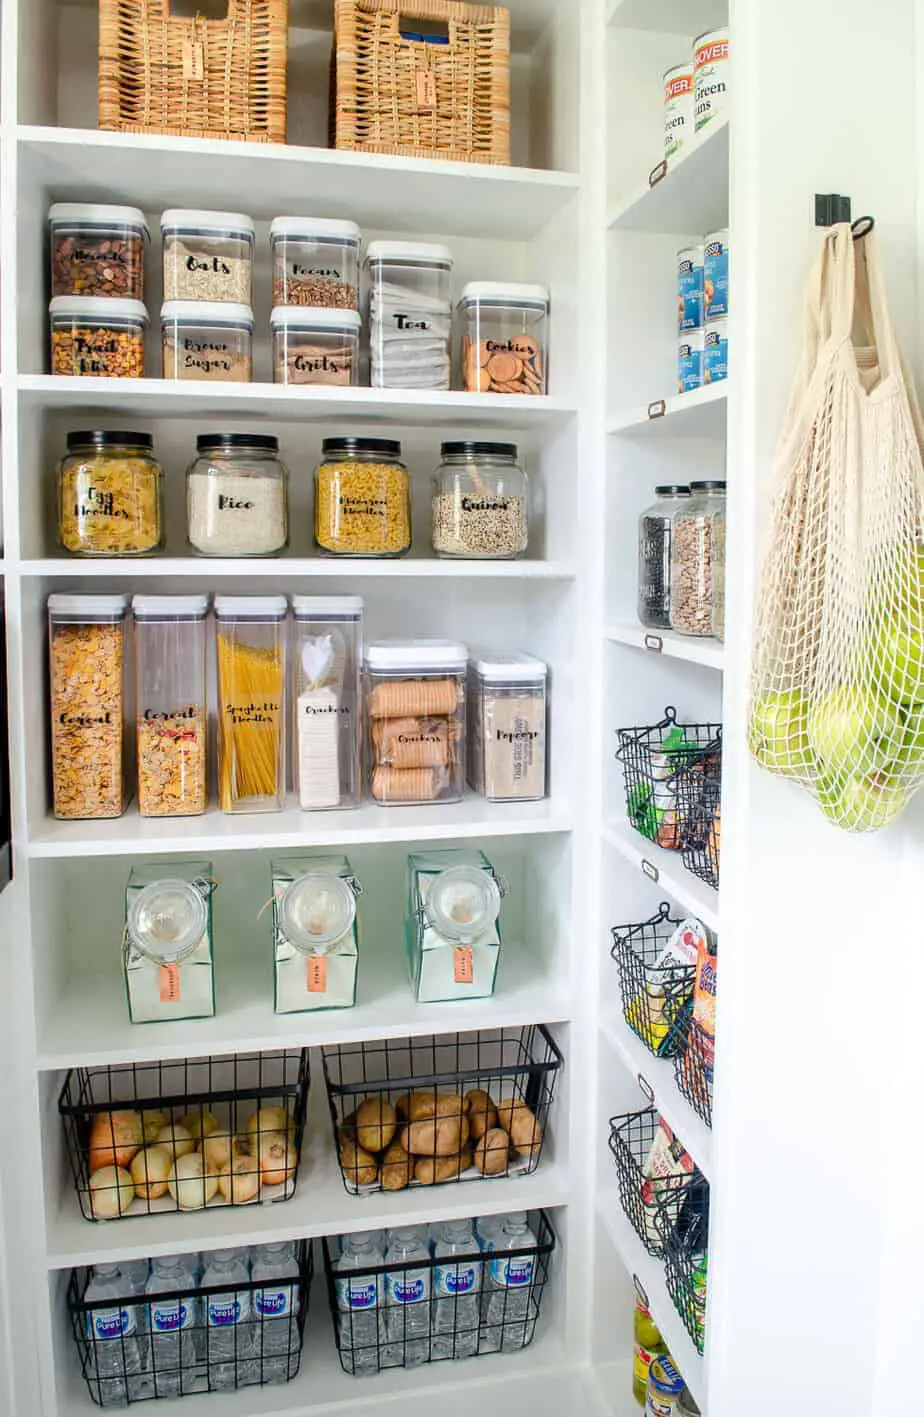 pantry shelving with labeled containers and jars